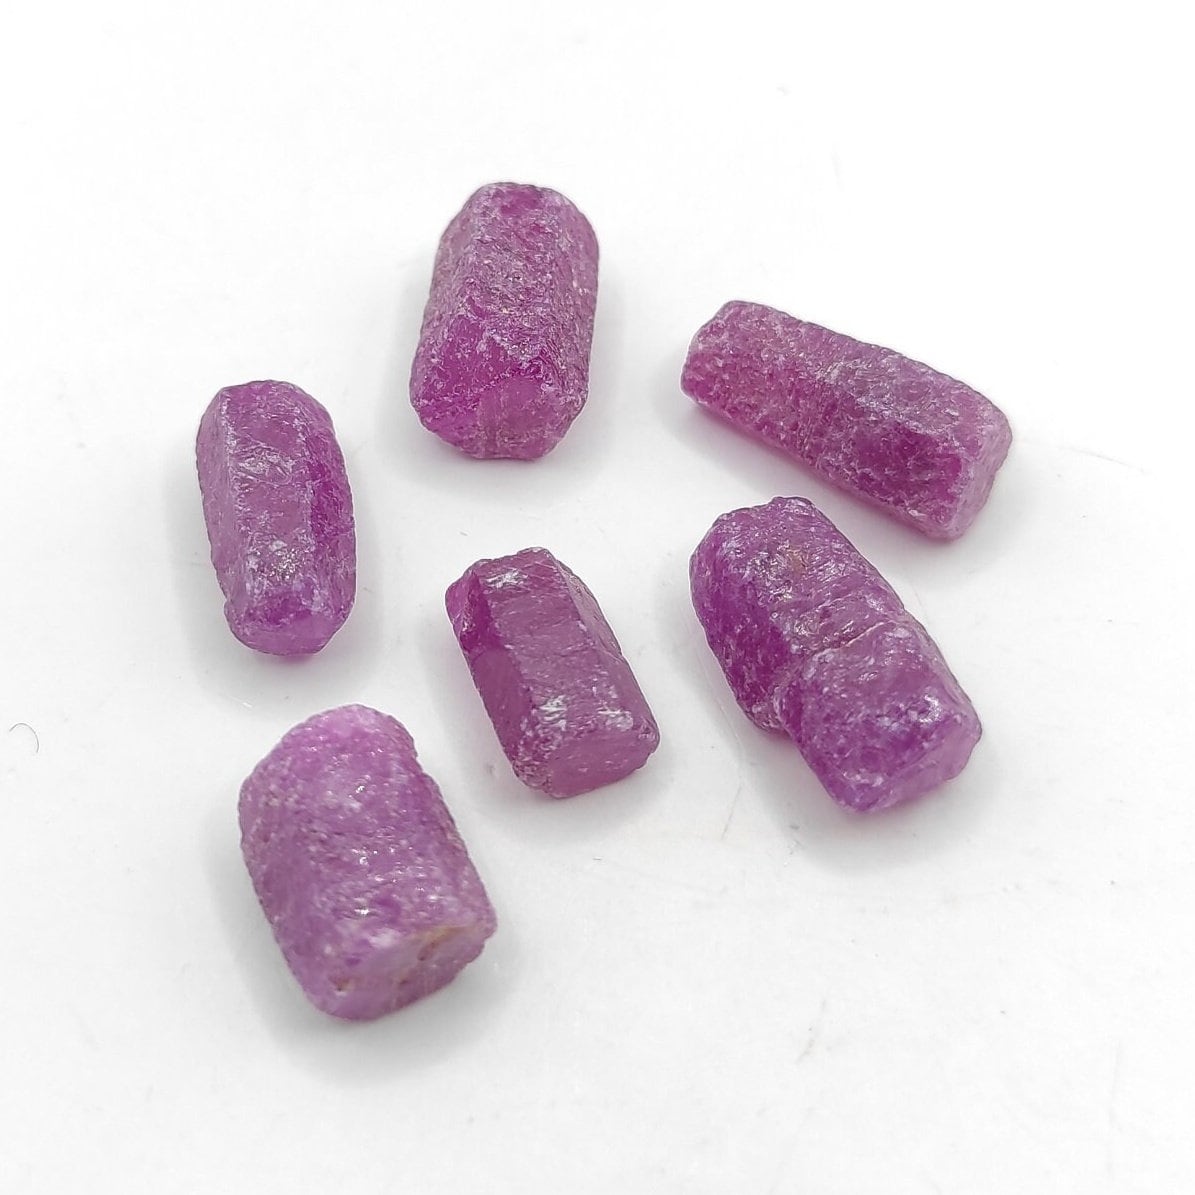 7.49g Lot of Ruby Crystals - Madagascar Rubies - UV Reactive - Loose Gemstones - Terminated Ruby Crystals - Loose Rough Gems - Unheated